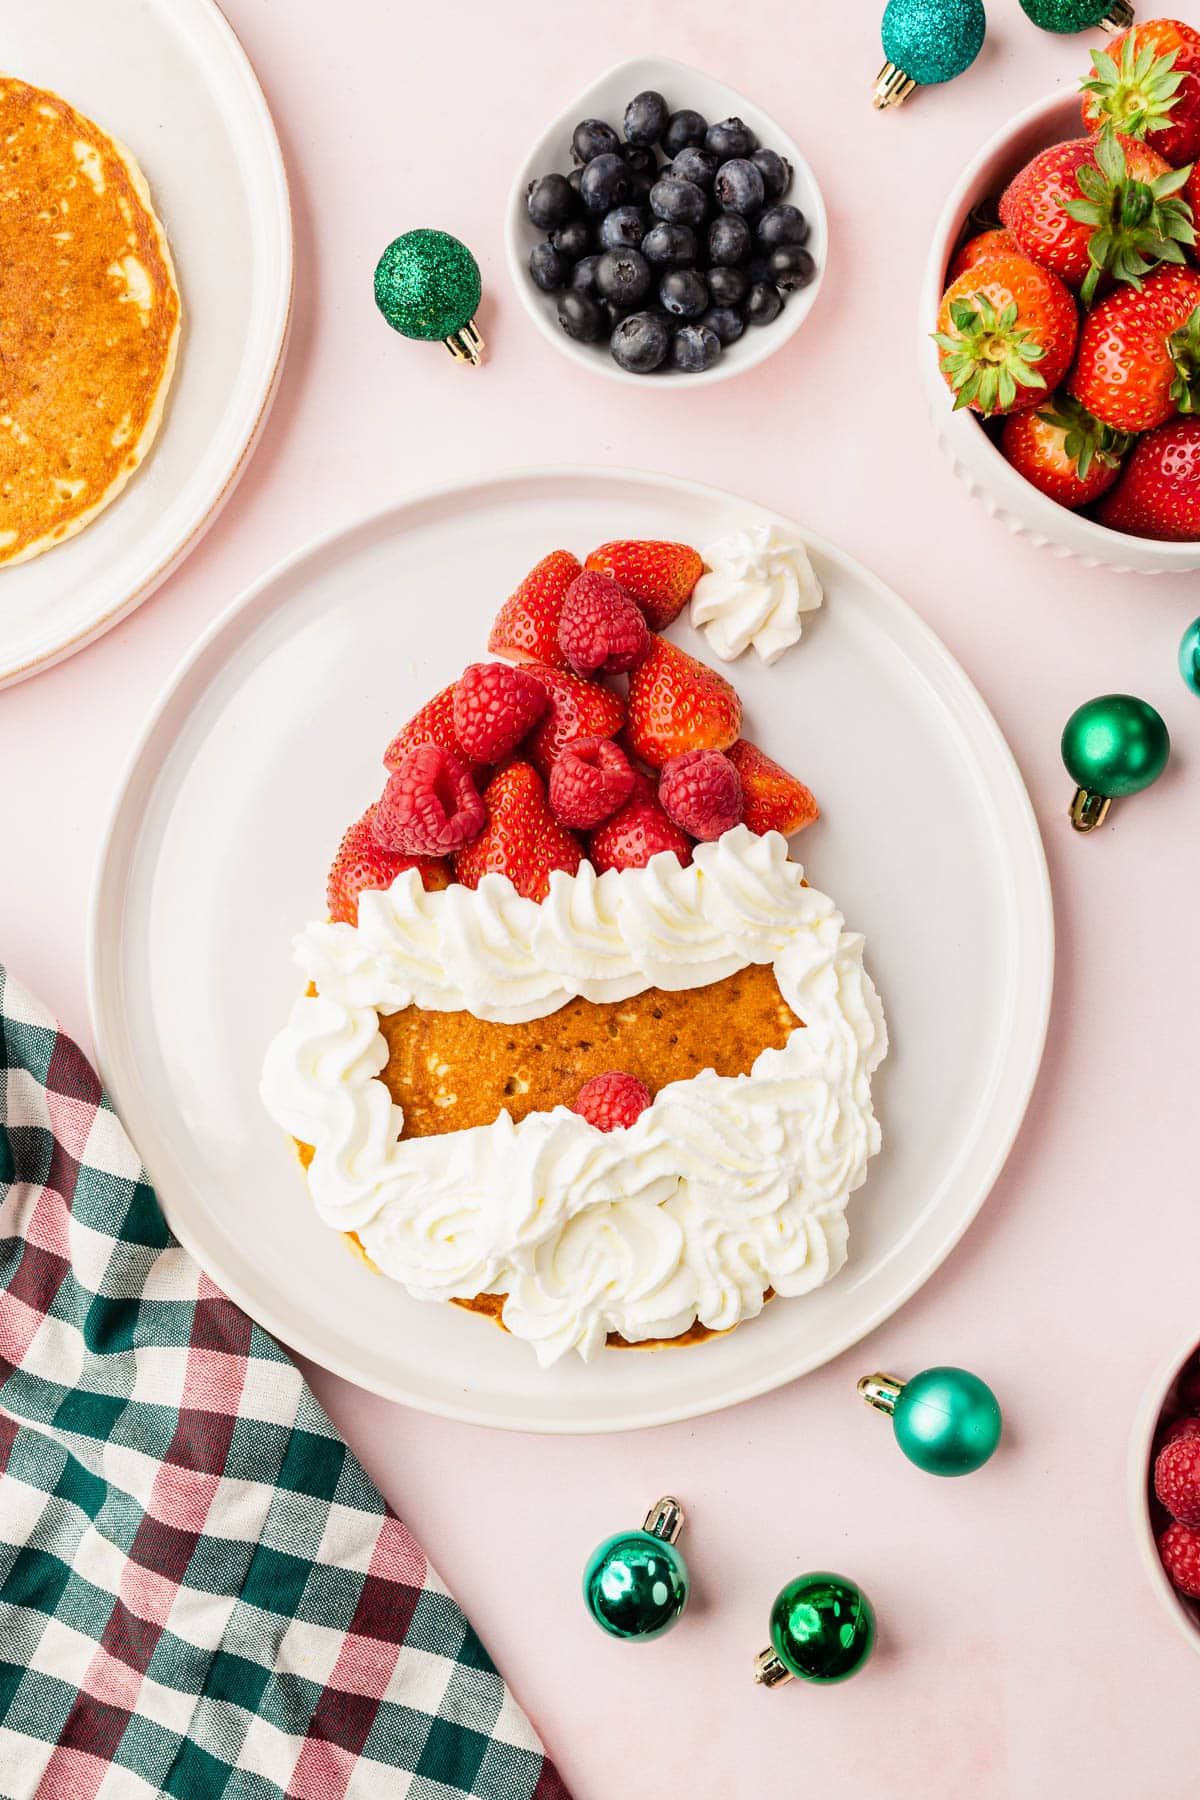 A santa pancake being decorated with raspberries, strawberries and whipped cream.